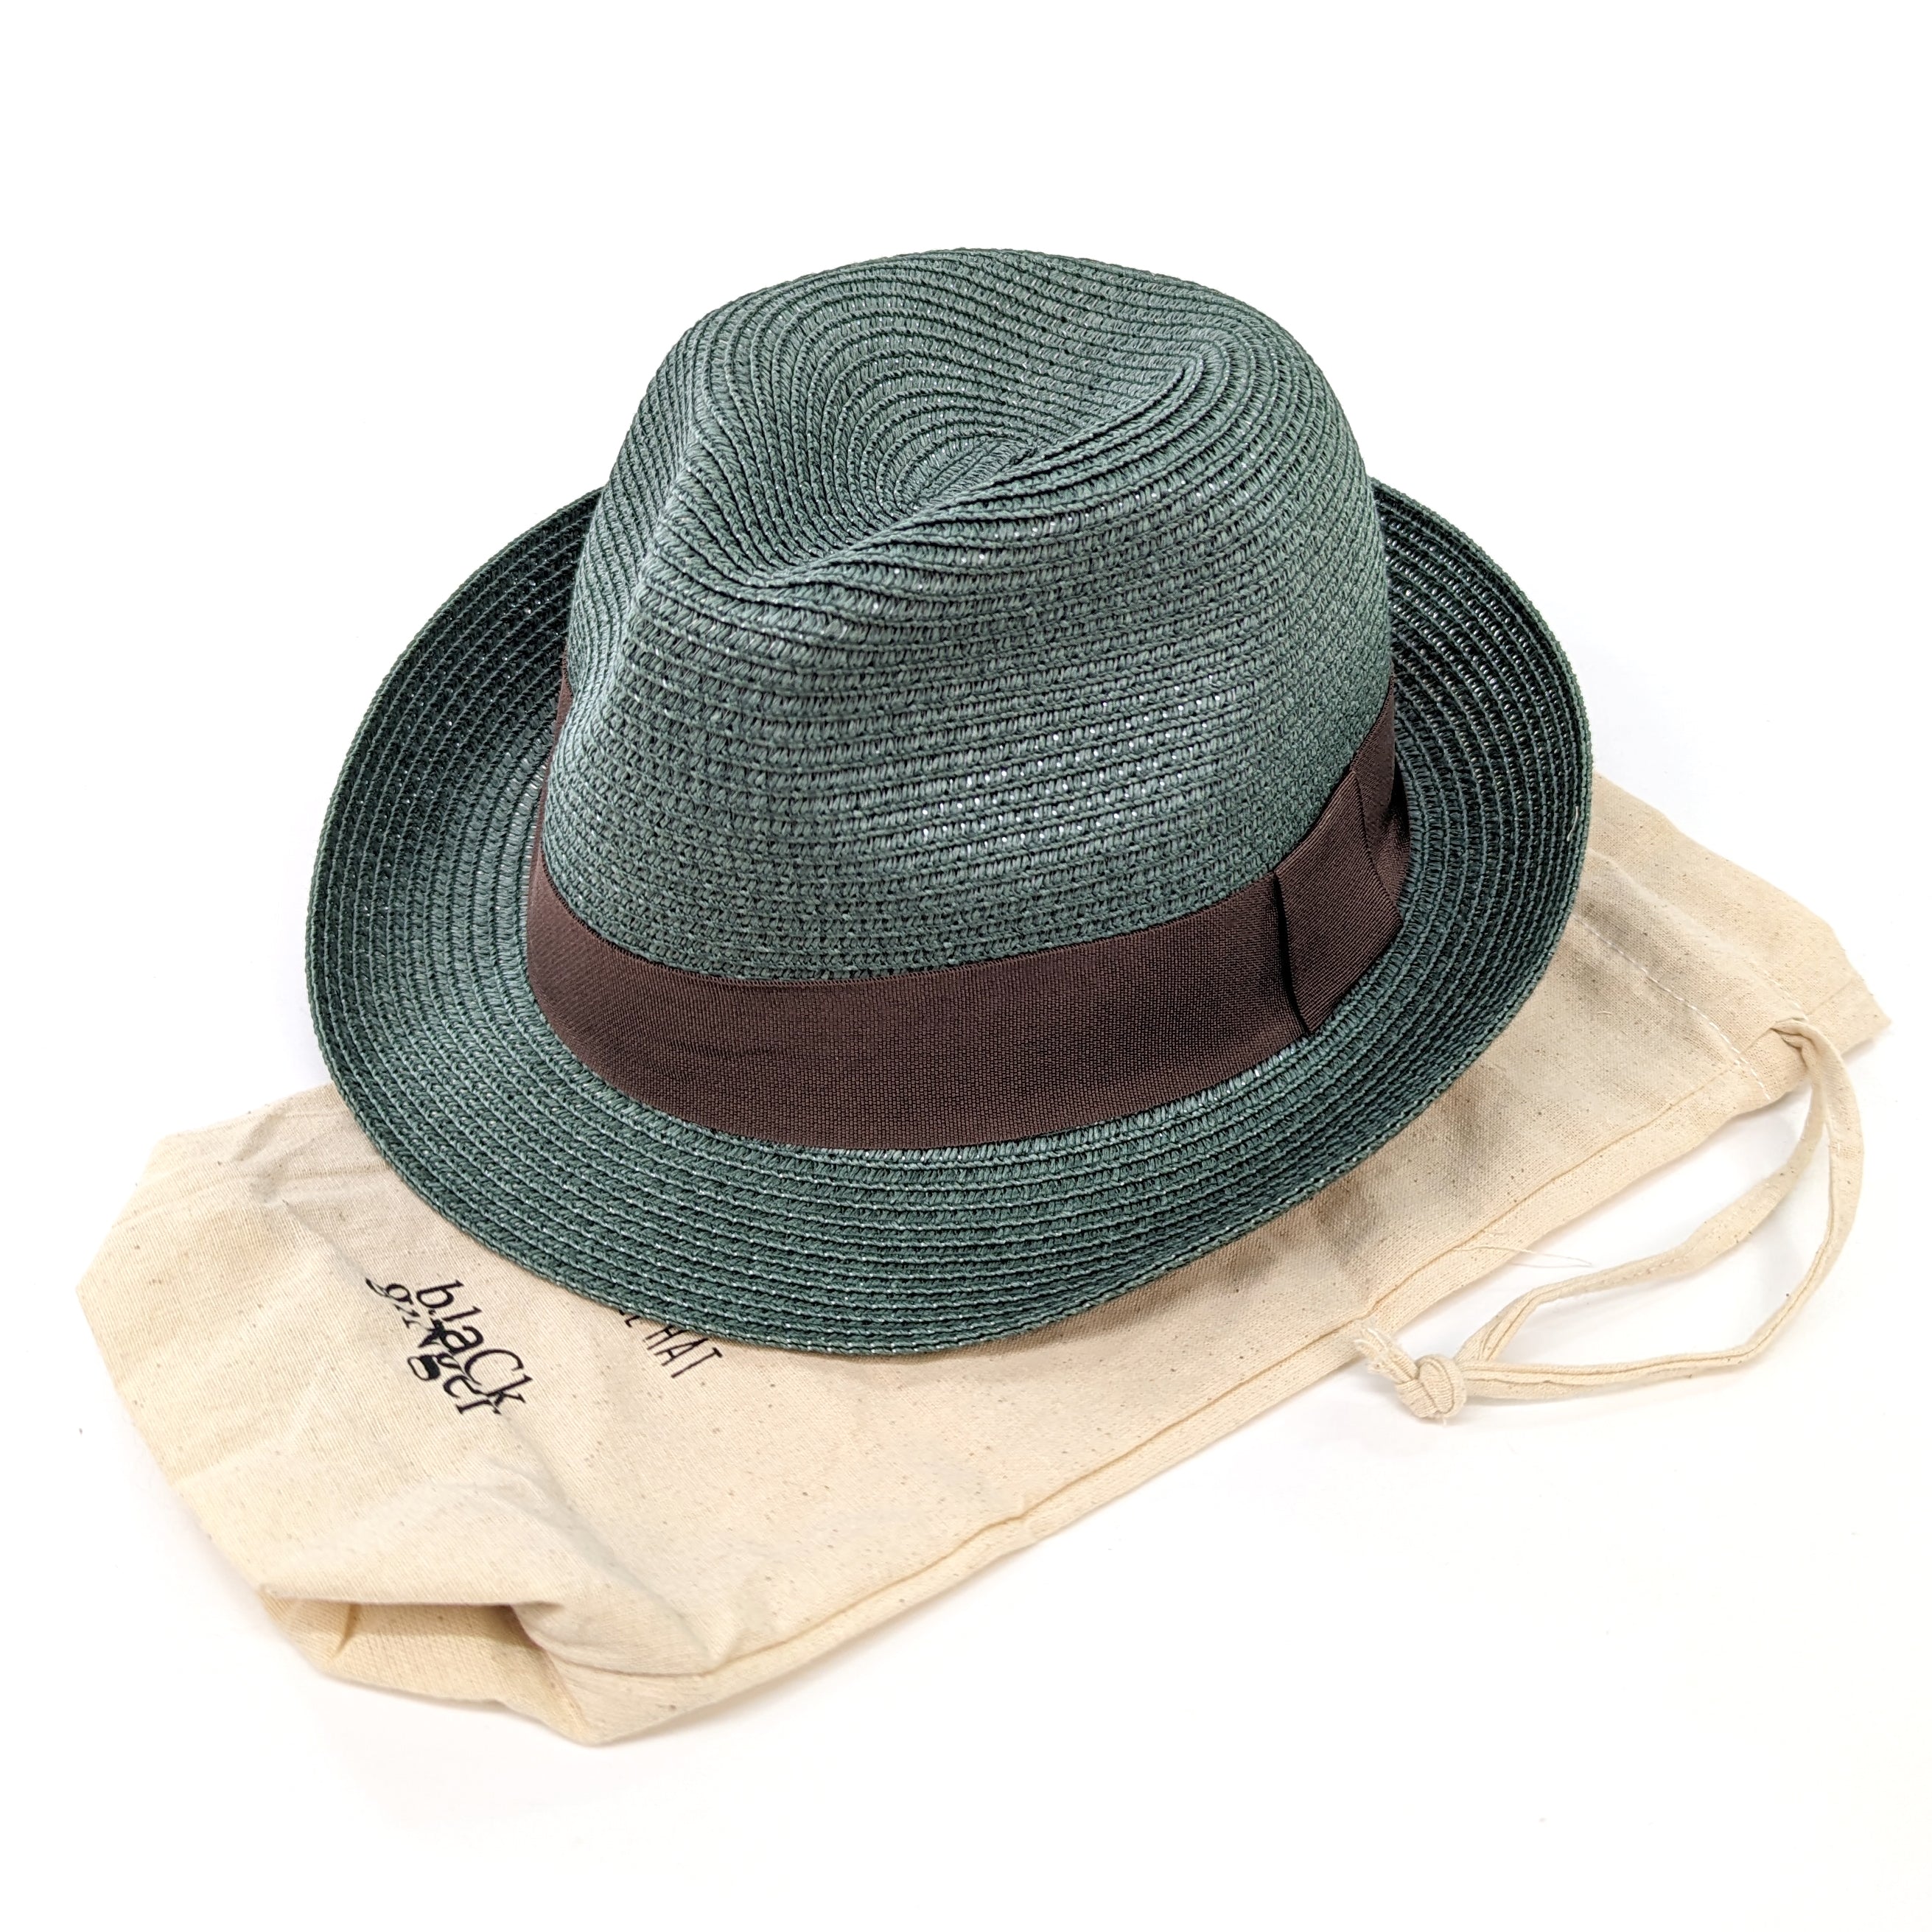 Black Ginger Trilby Teal Summer Hat Panama Foldable Roll Up + Travel Bag Holiday